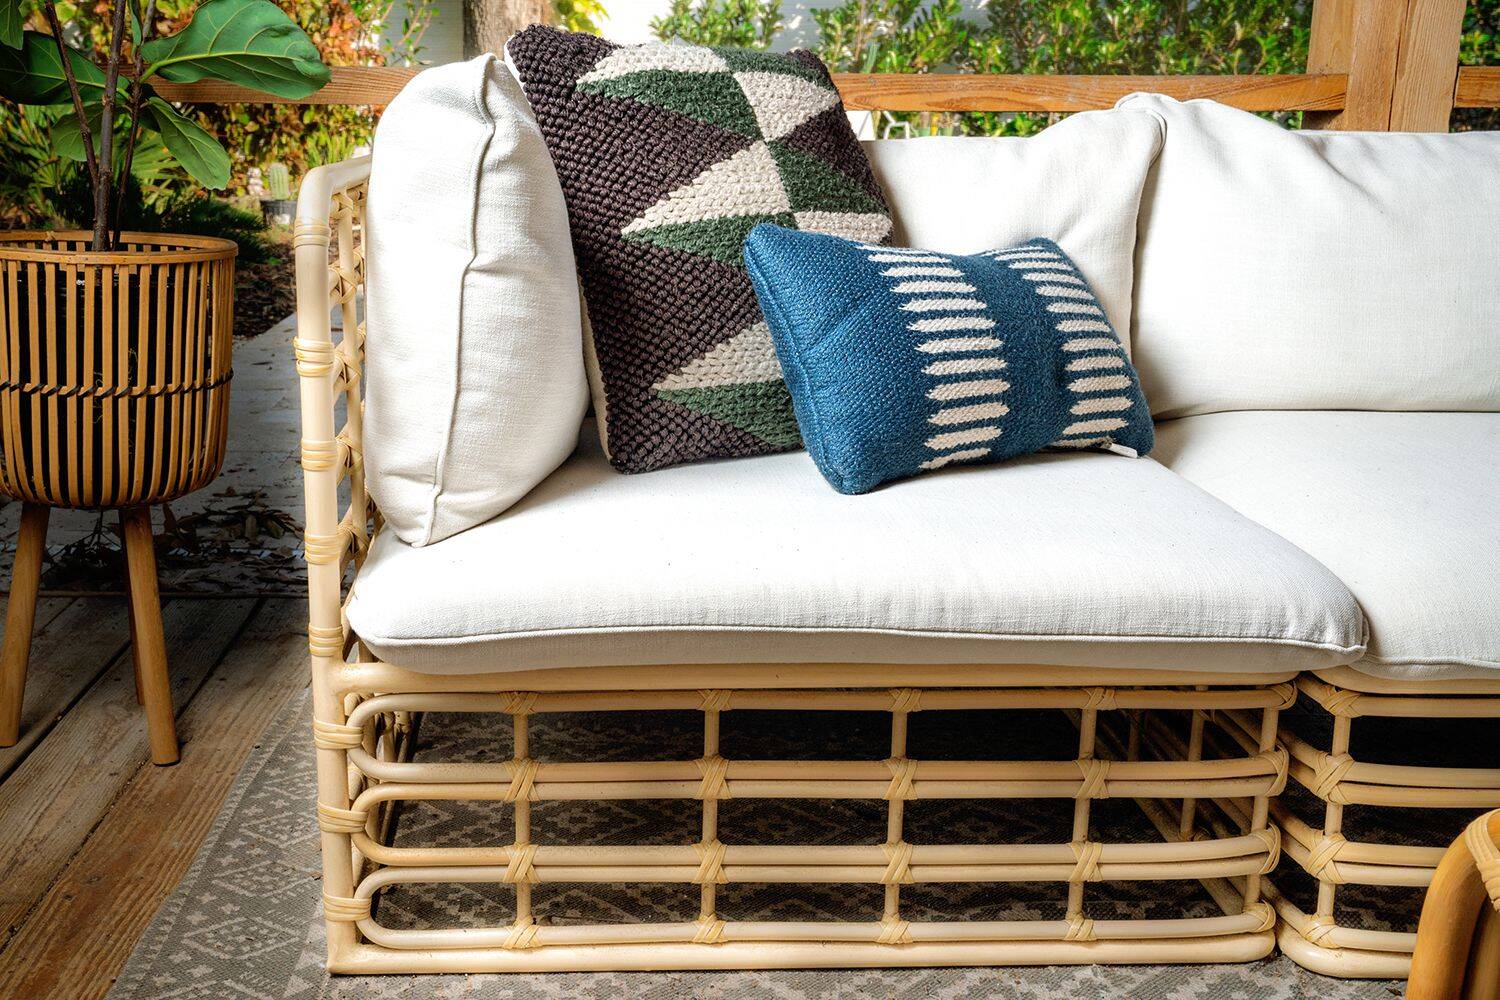 How To Secure Outdoor Pillows